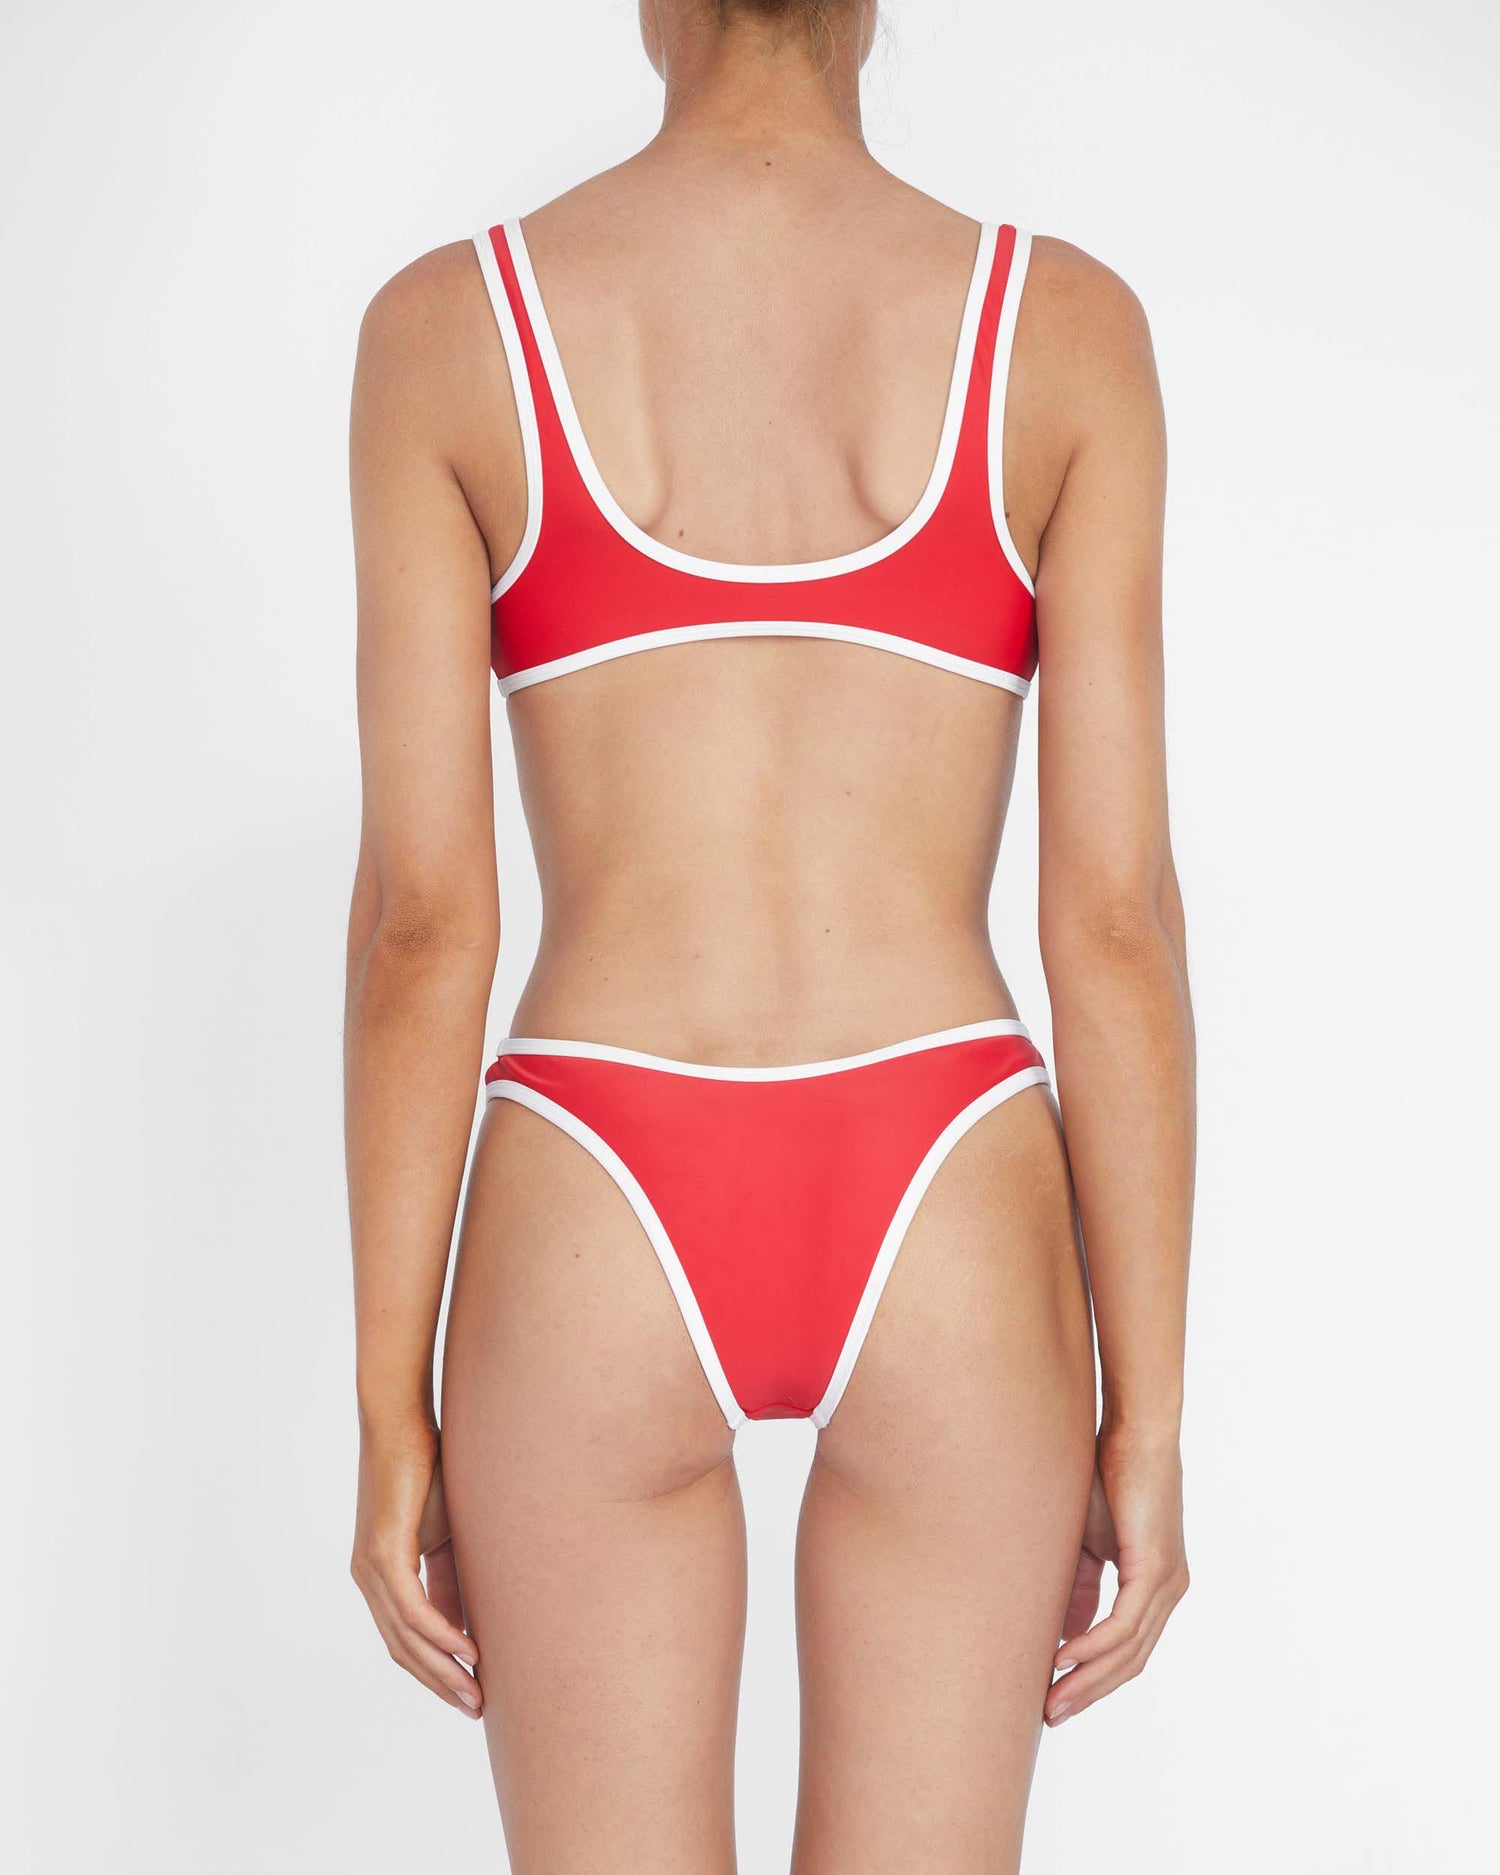 It's Now Cool Zwemkleding - 90s Duo Crop - Rood & Wit Contrast